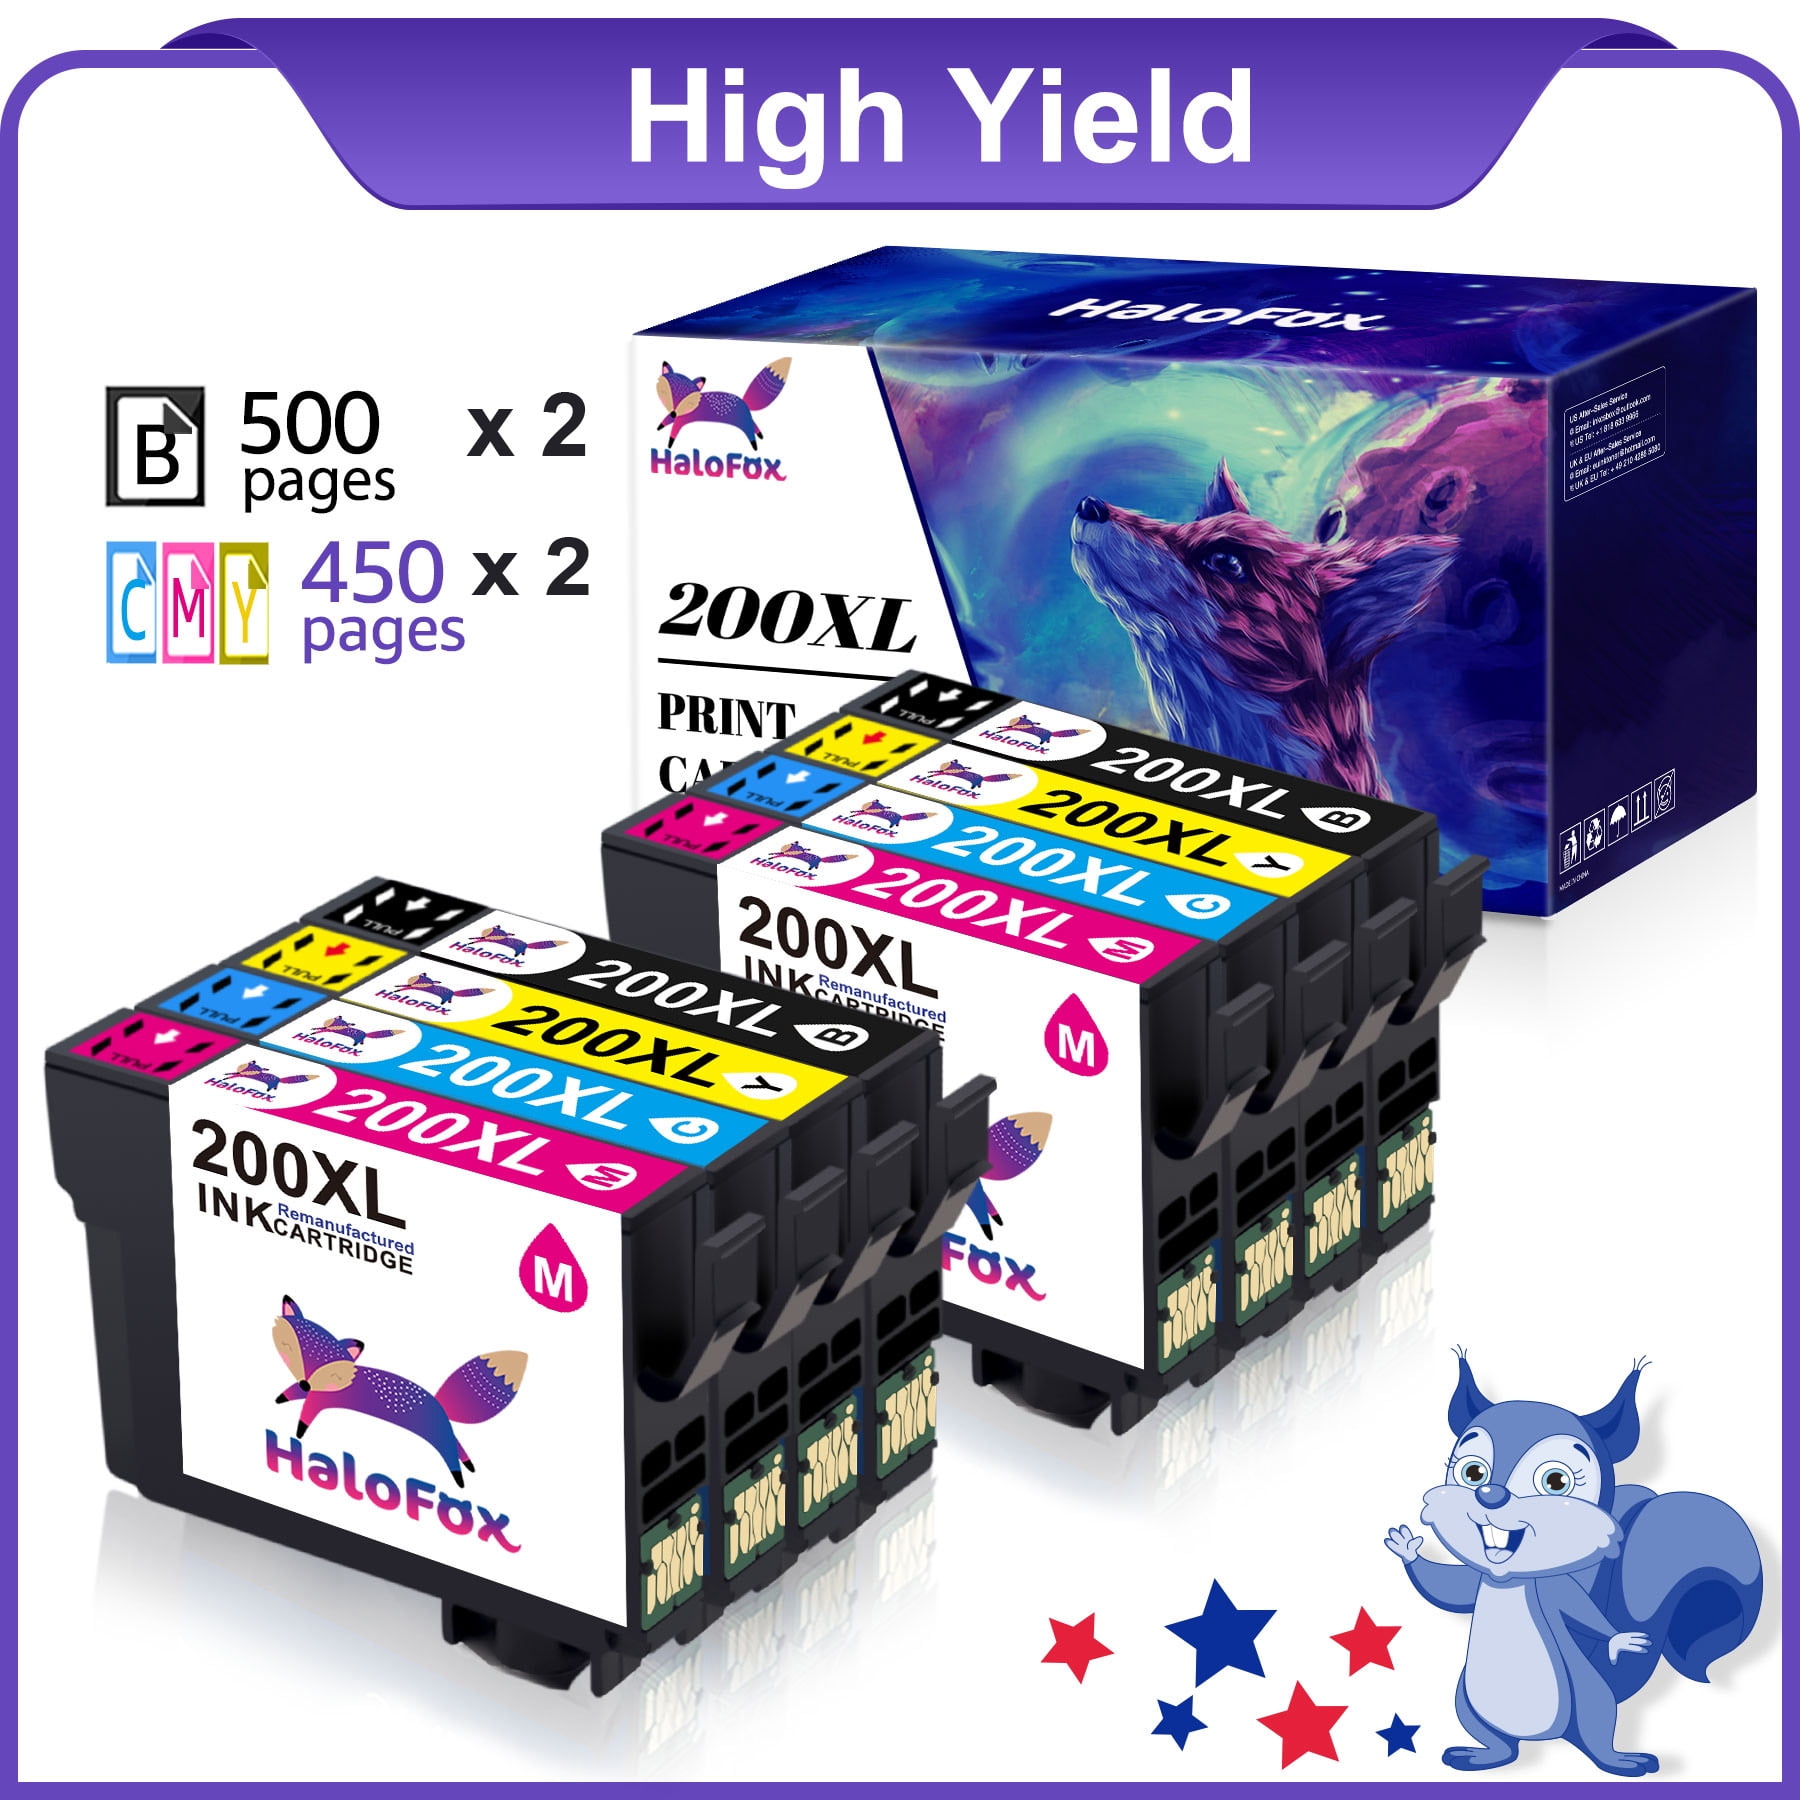 pessimistisk Gammeldags Legepladsudstyr 200XL Ink Cartridge Replacement for Epson Expression XP-200 XP-300 XP-310 XP -400 Workforce WF-2520 WF-2530 WF-2540 Ink Cartridges (2 Black,2 Cyan,2  Magenta,2 Yellow) - Walmart.com